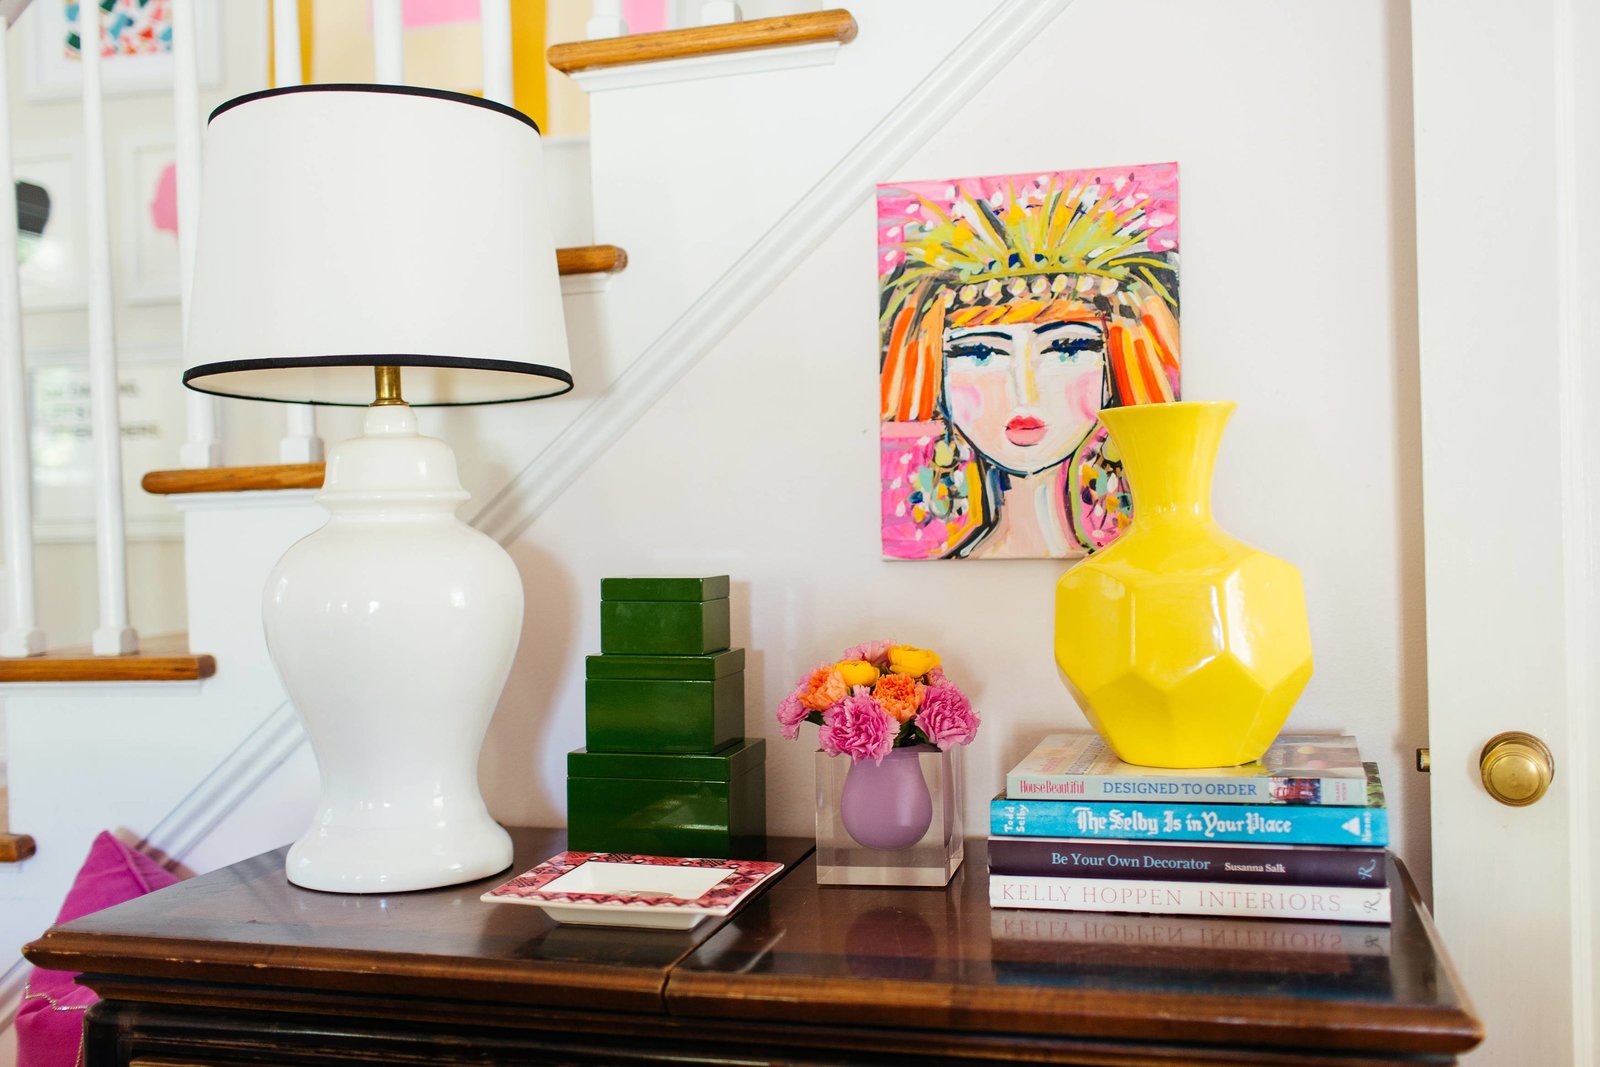 A side table with a white lamp and accessories.